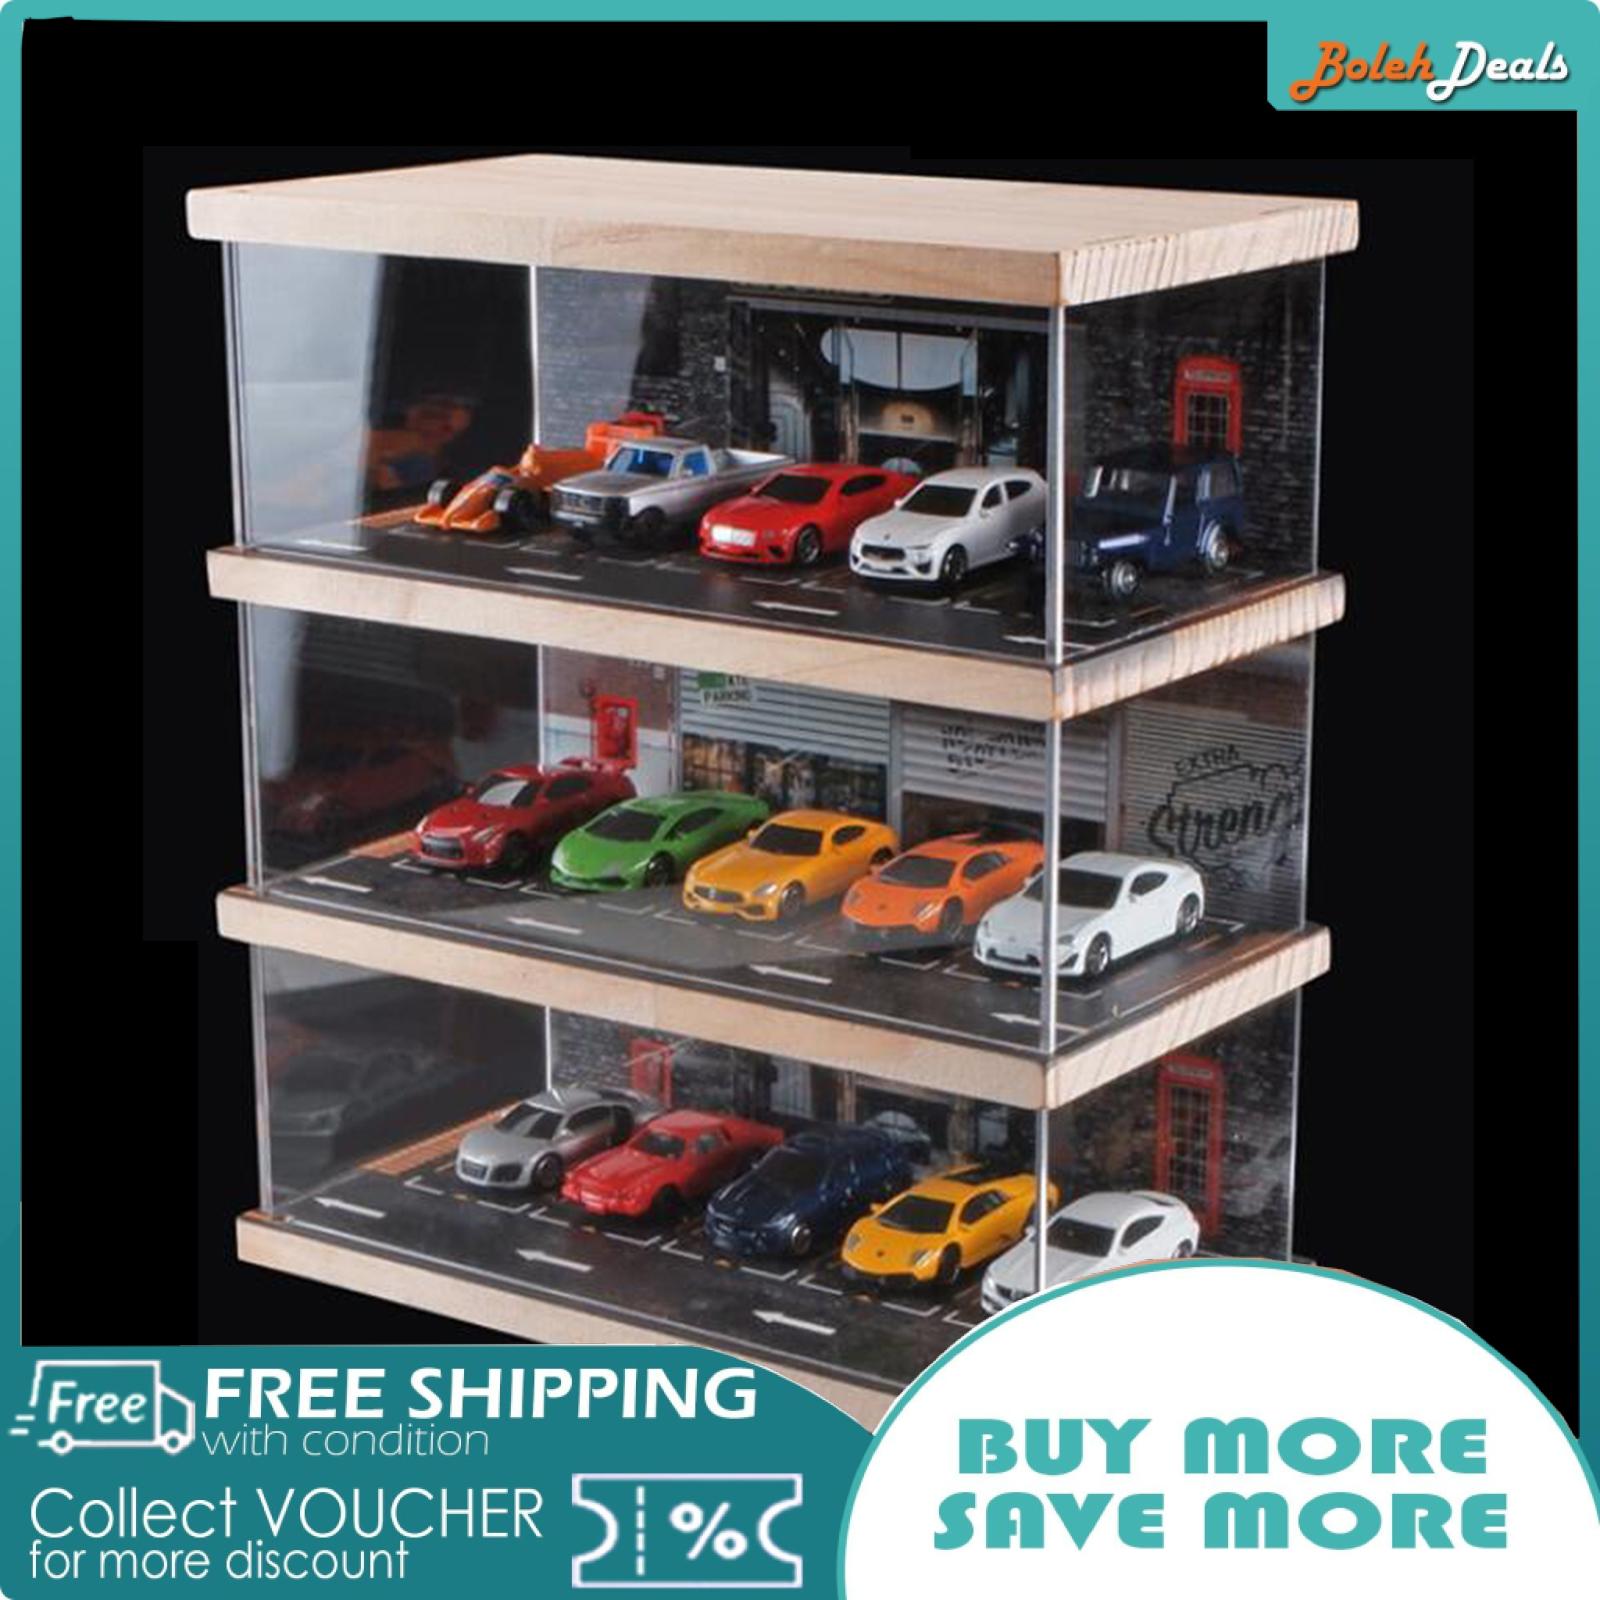 1/64 Scale Toy Car Parking Lot Desktop Decor Variable Protective Car Garage  Display Case, for Collectors, Sports Car Gifts Toy Cars Alloy Car 3 tier